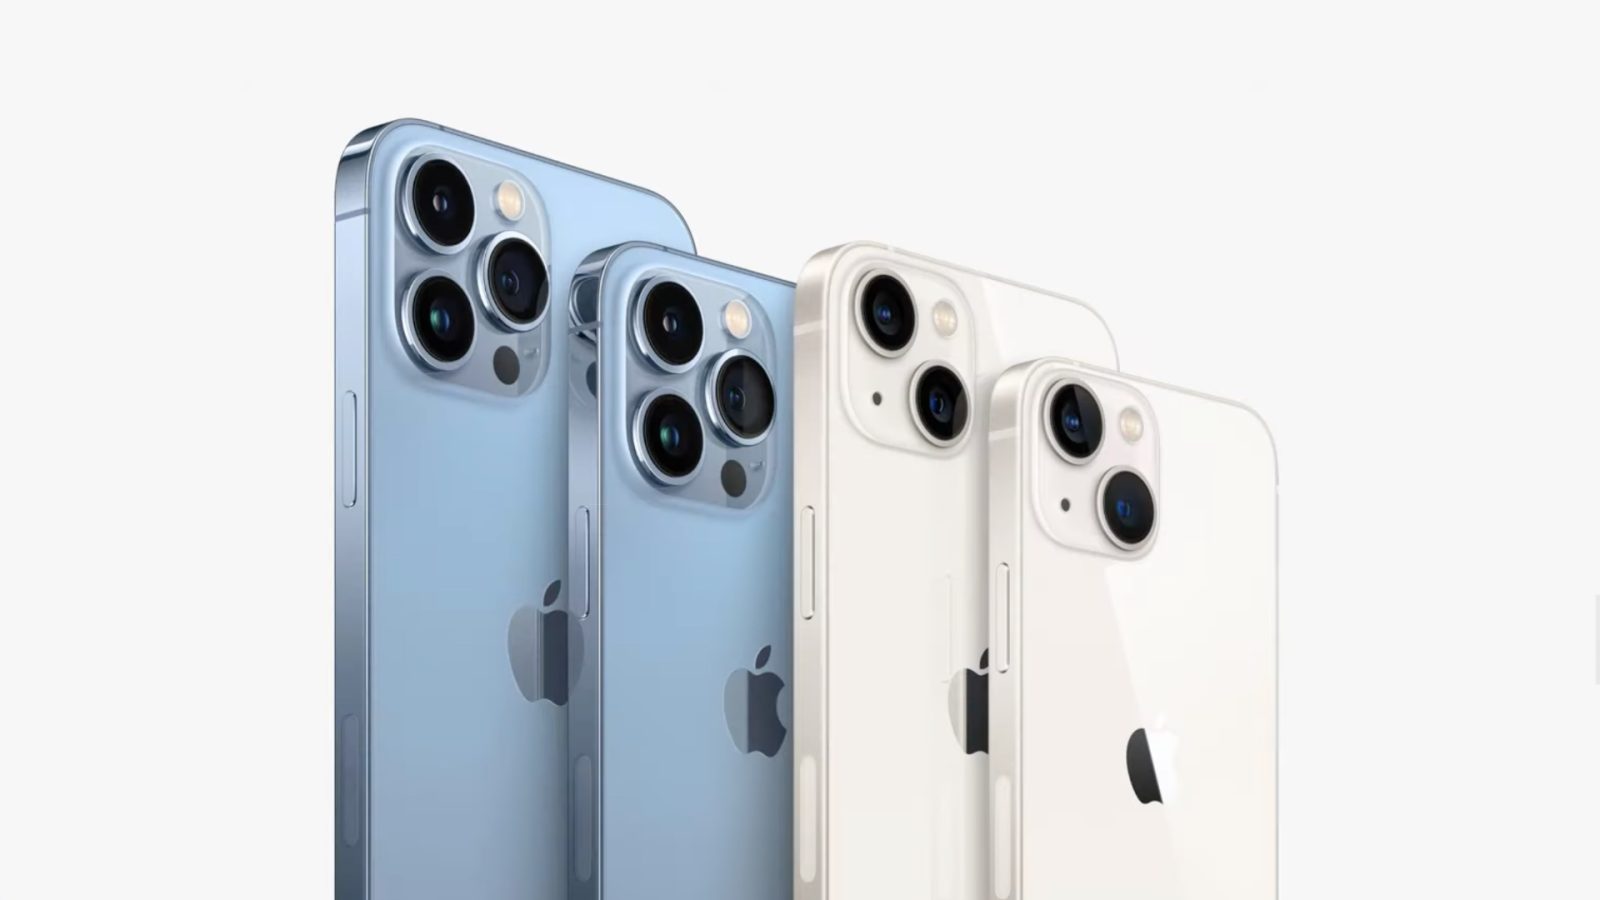 Poll: Are you buying the iPhone 13? If so, which model? - 9to5Mac